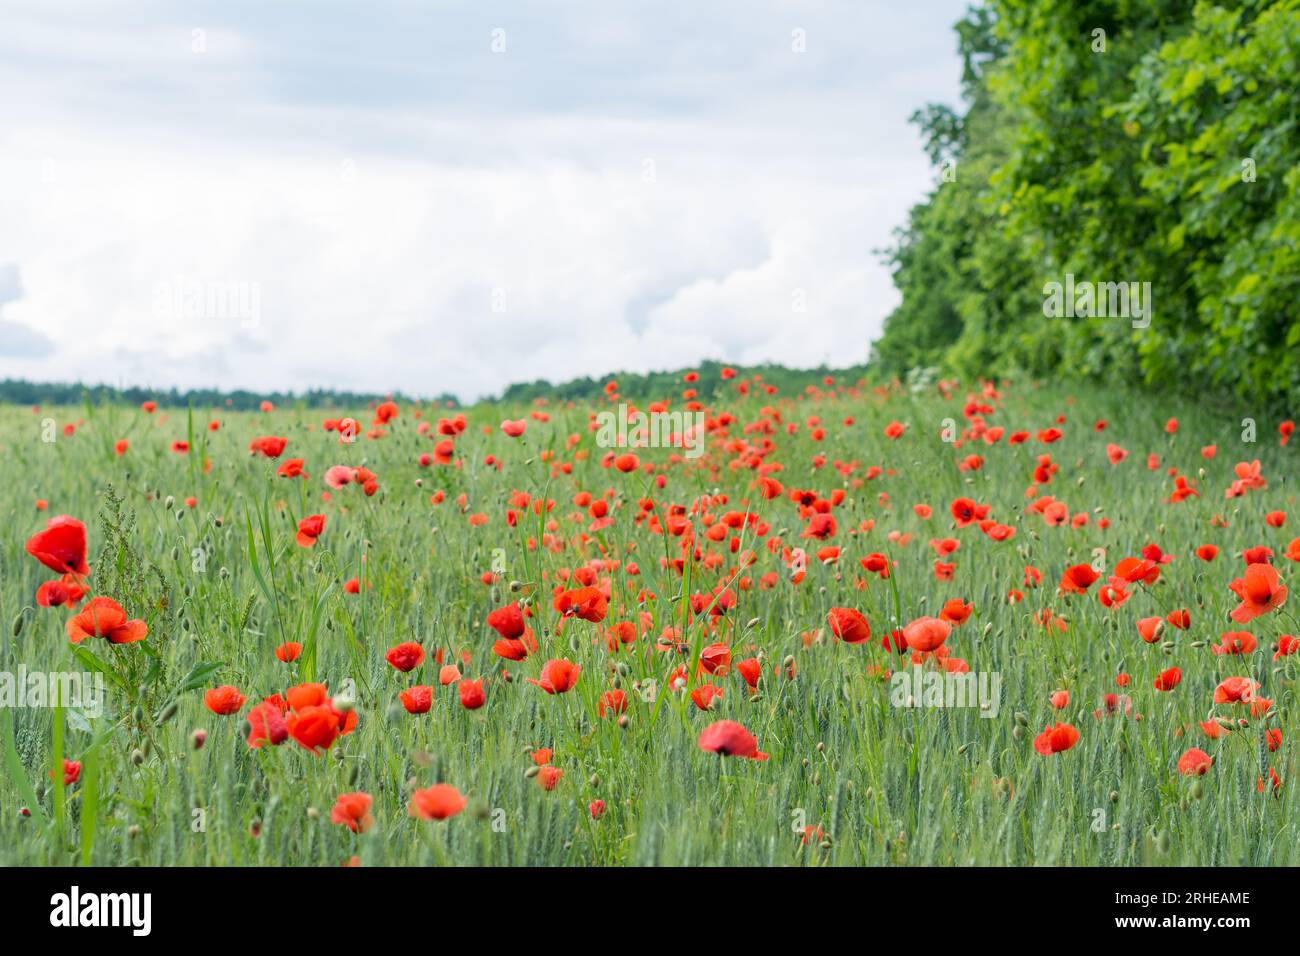 Flowering red common poppies in green barley field by forest trees under cloudy sky. Spring cornfield with corn poppy weeds in a melancholy landscape. Stock Photo